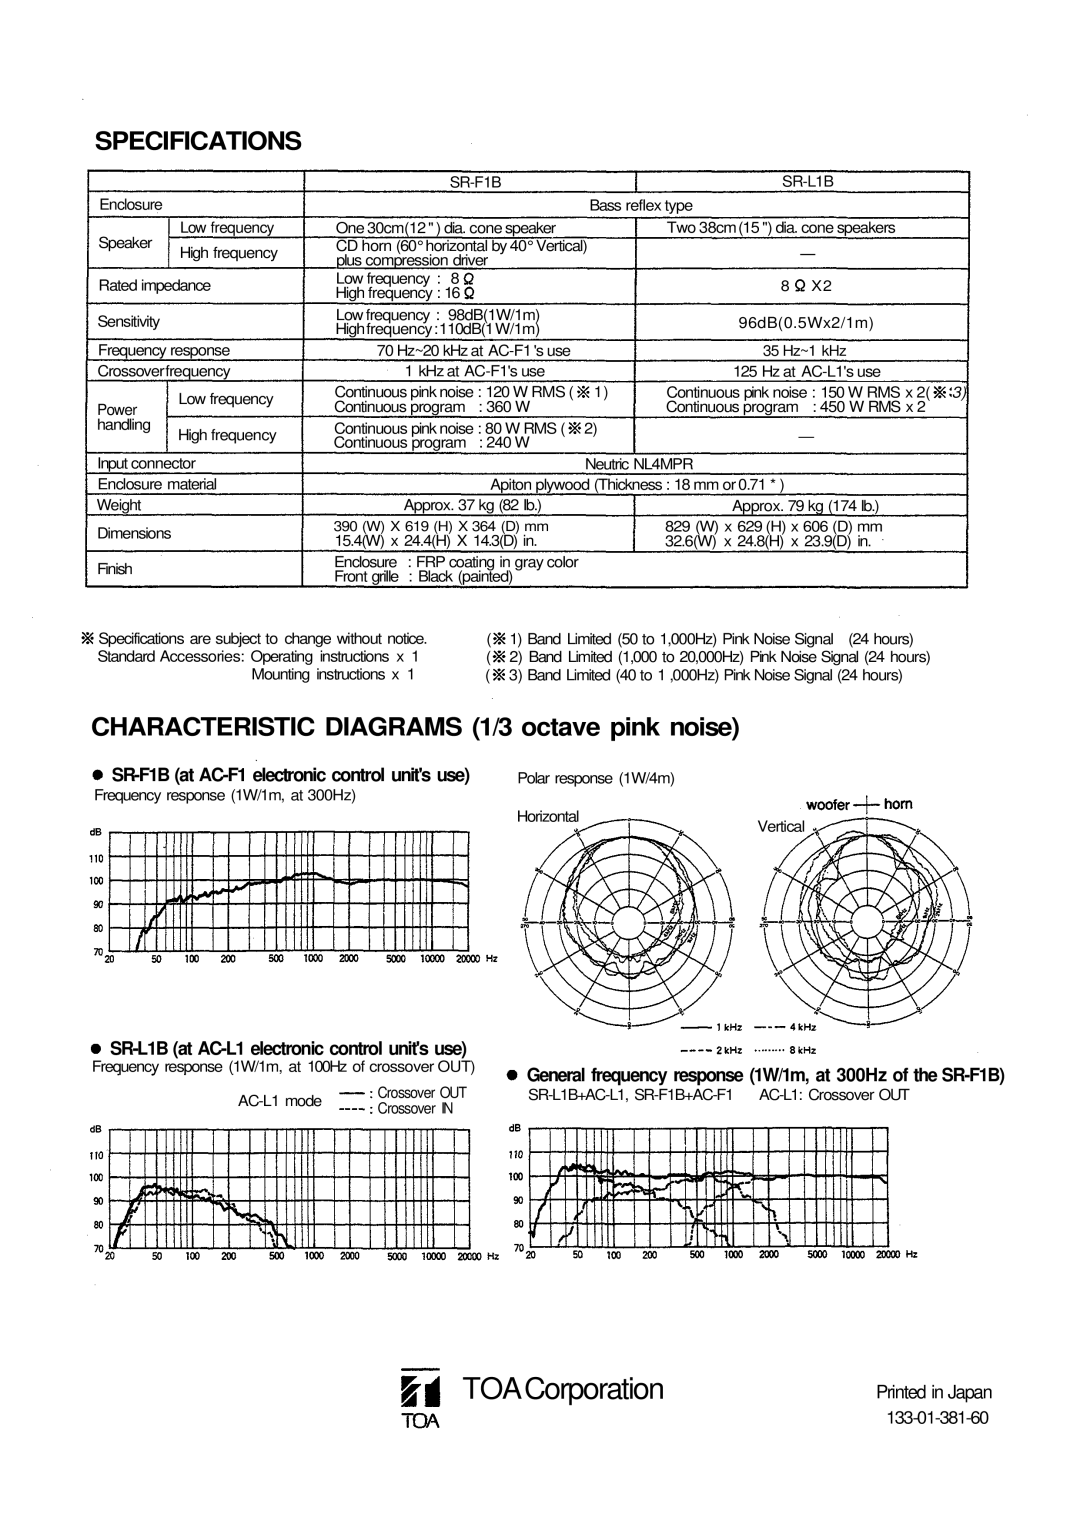 Verizon SR-F1B manual Specifications, CHARACTERISTIC DIAGRAMS 1/3 octave pink noise, TOACorporation 